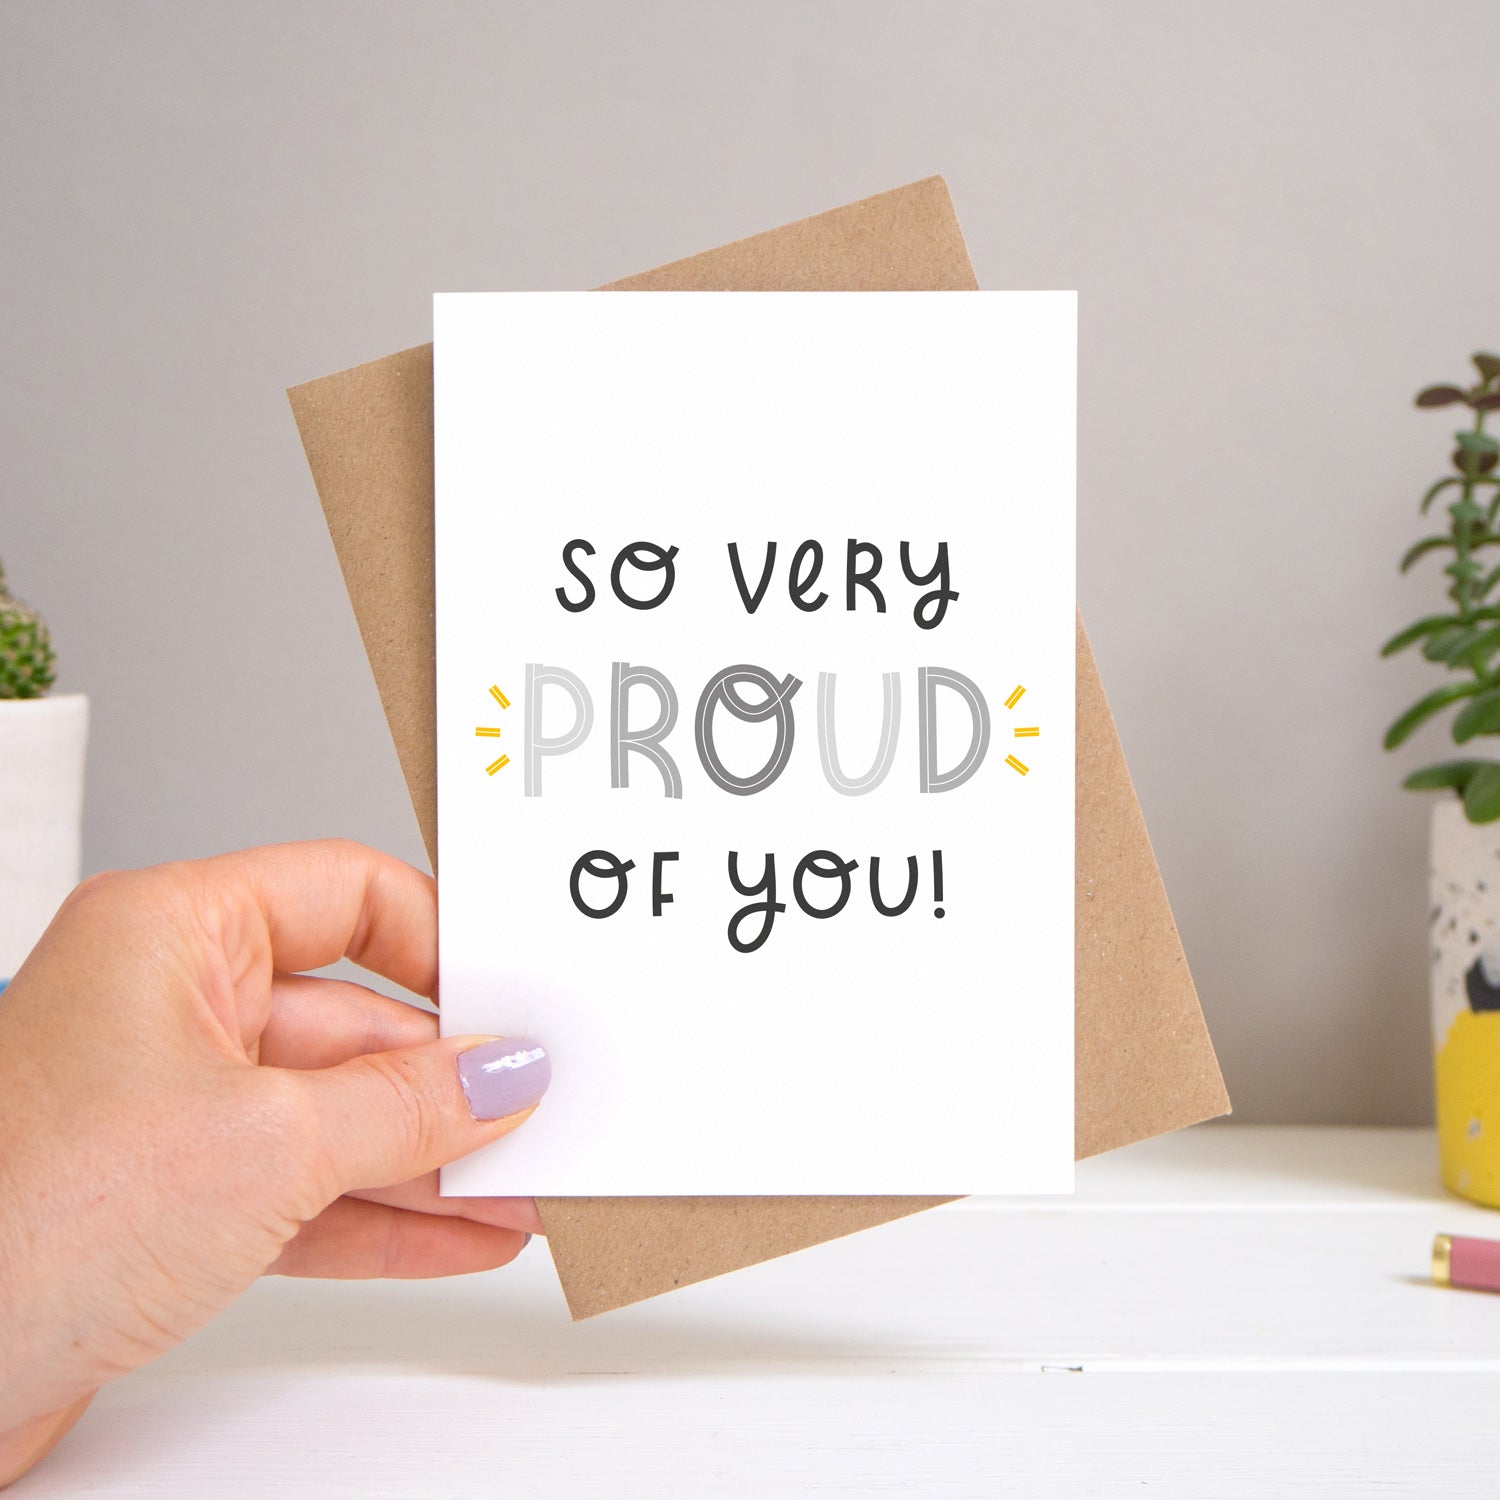 A ‘so very proud of you’ card held over a warm grey and white background with potted plants peeping the sides. Behind the card is a kraft brown envelope that comes with the card. The text on this version of the card is in varying tones of grey.